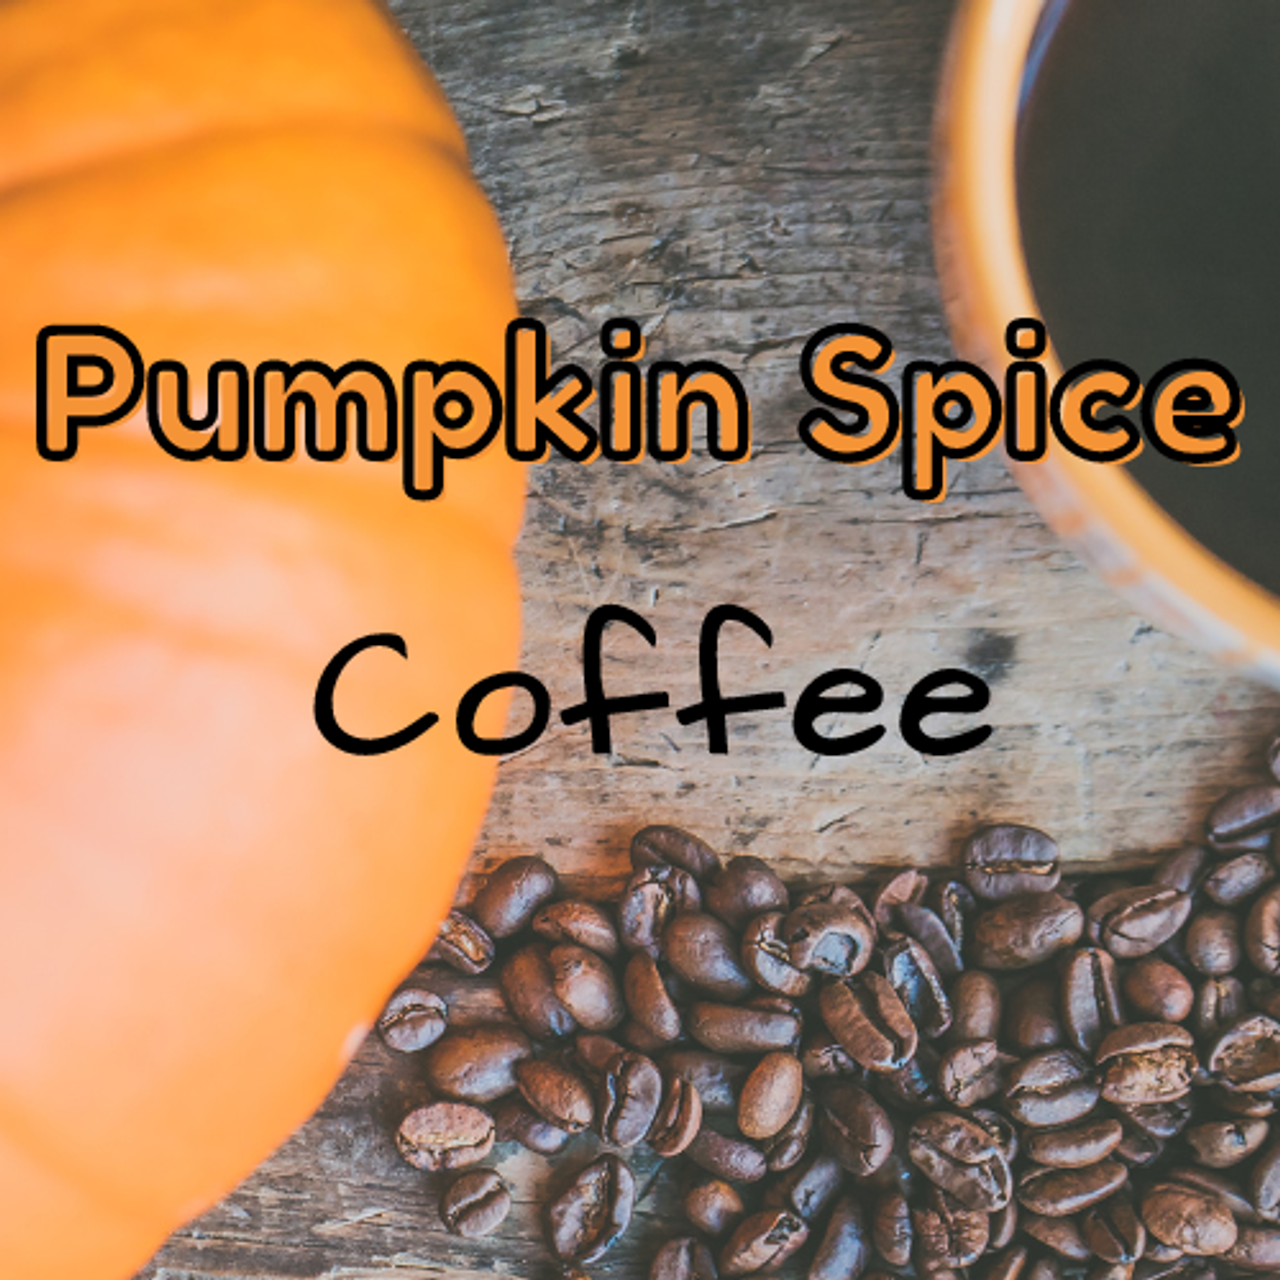 https://cdn11.bigcommerce.com/s-515m7/images/stencil/1280x1280/products/4493/8083/PumpkinSpiceCoffee__25537.1663772694.png?c=2